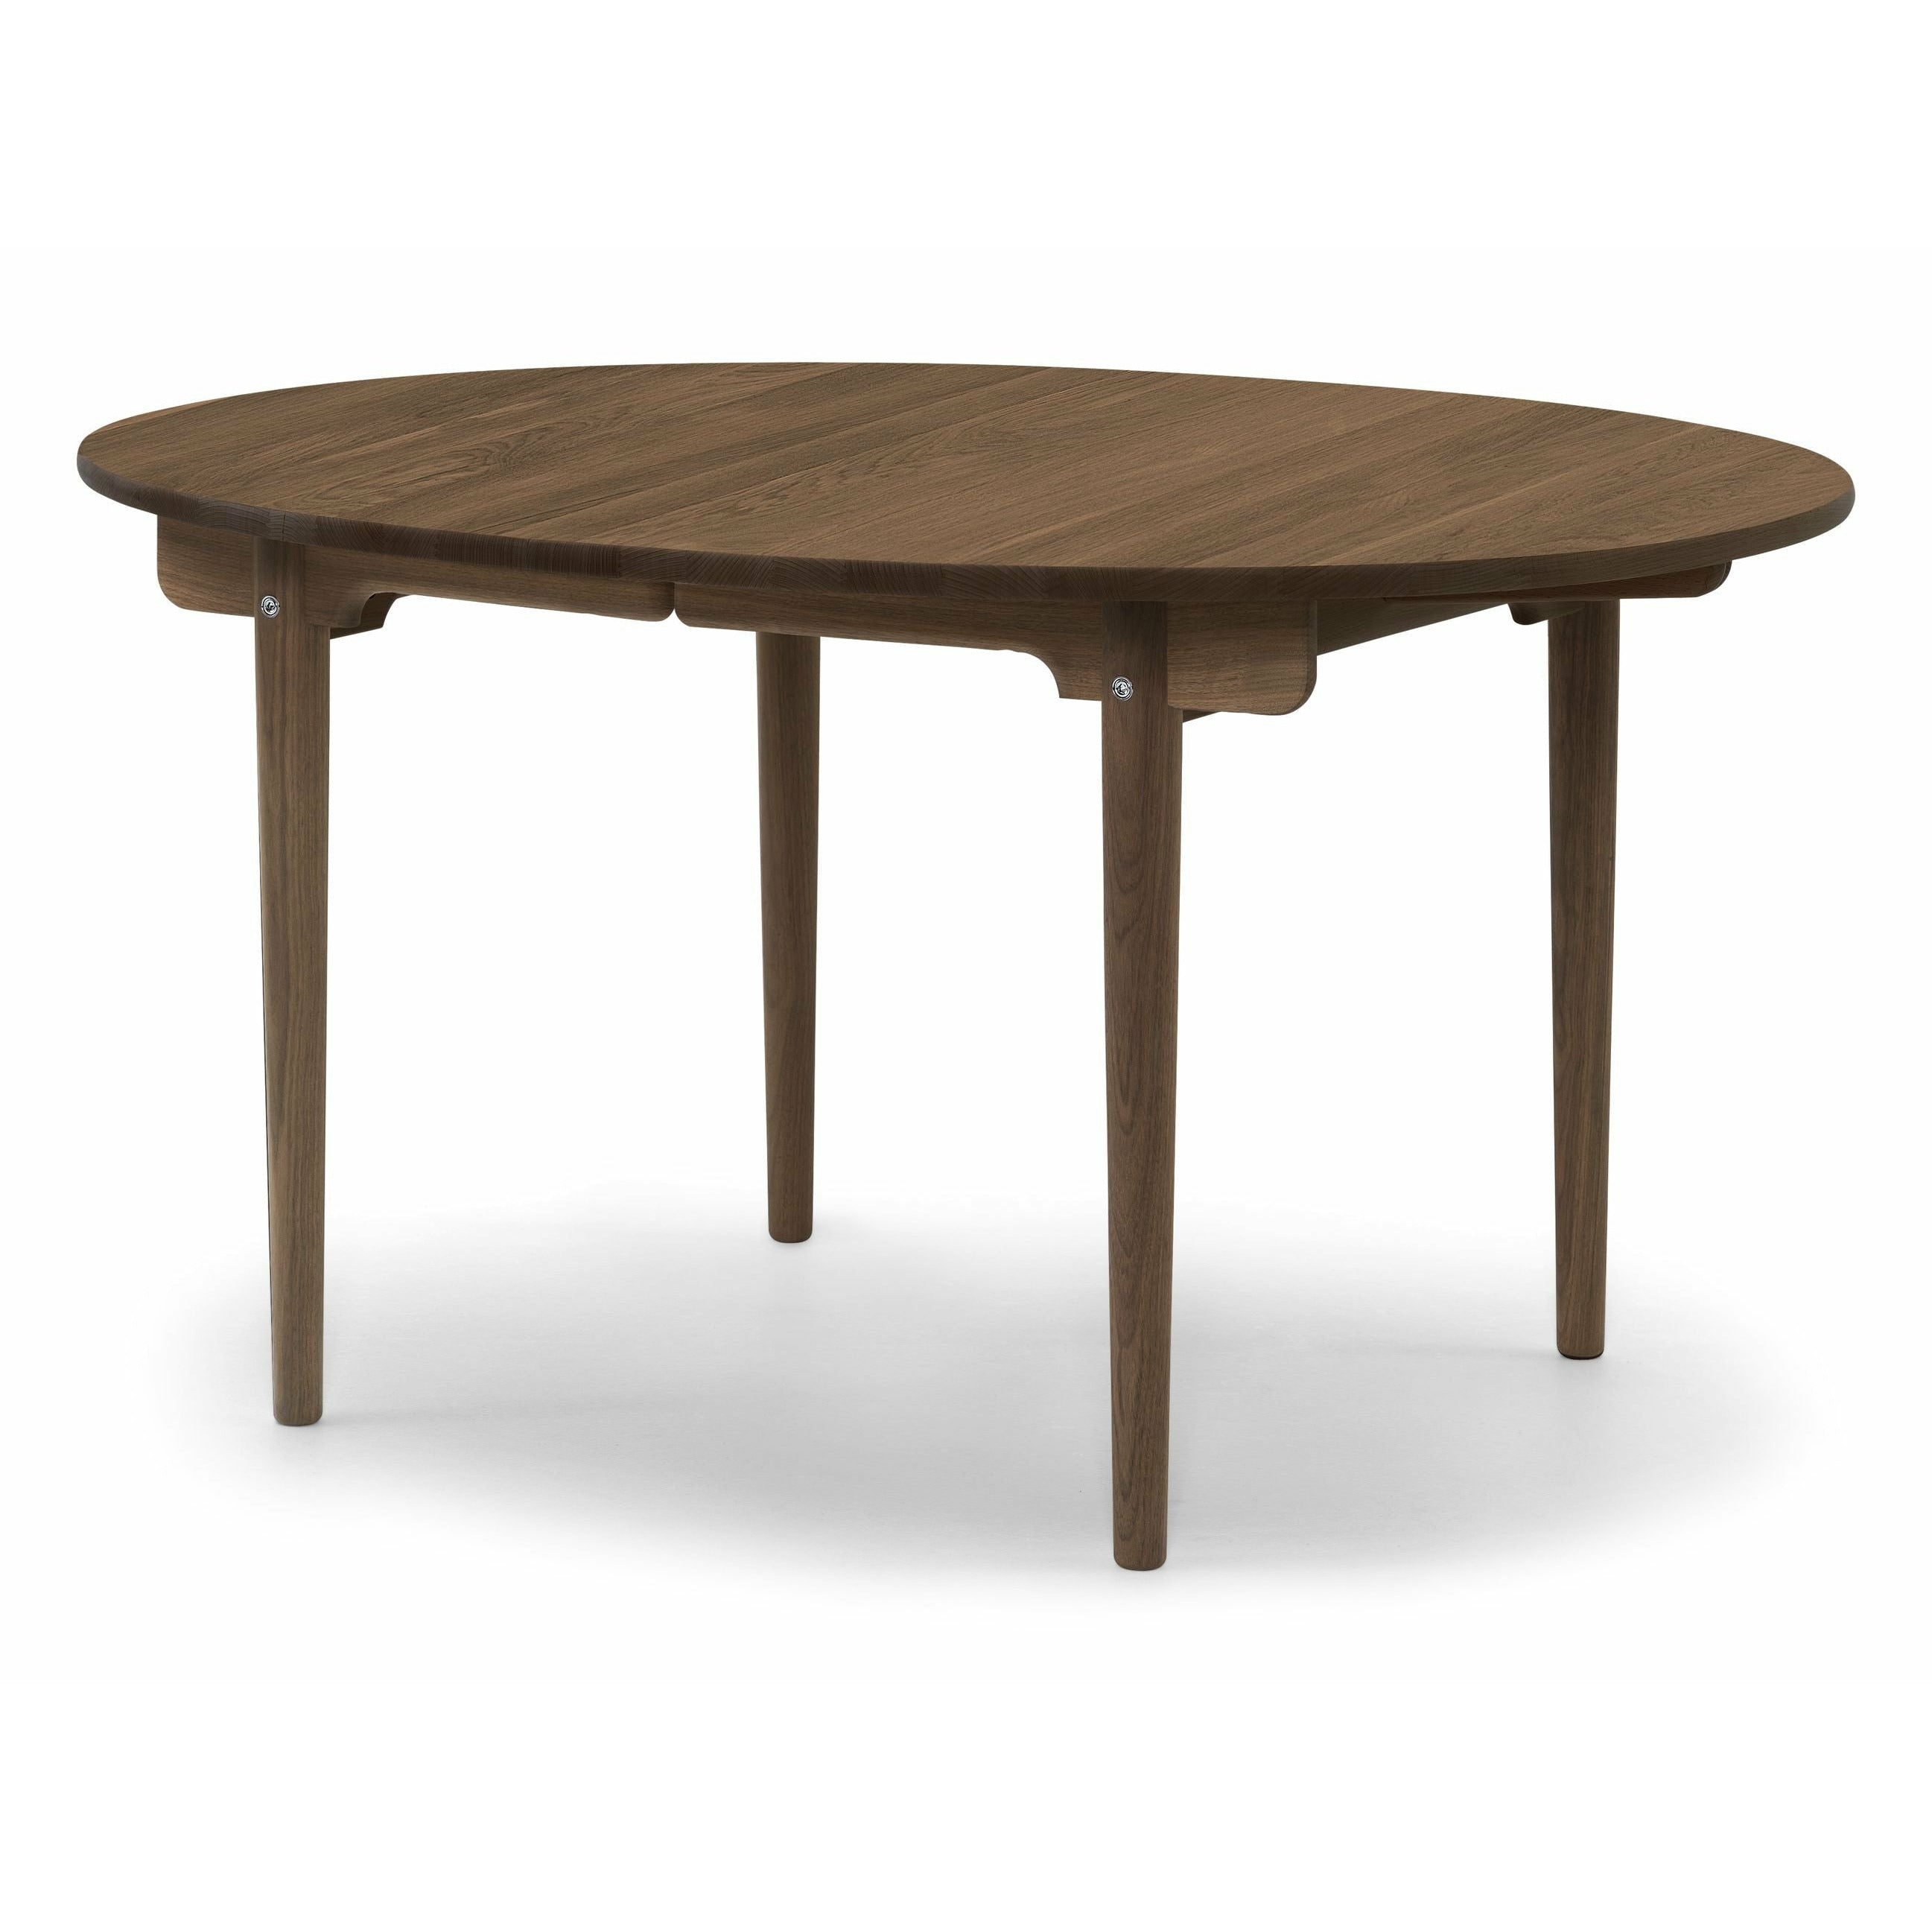 Carl Hansen Ch337 Dining Table Designed For 2 Pull Out Plates, Oak Smoke Colored Oil